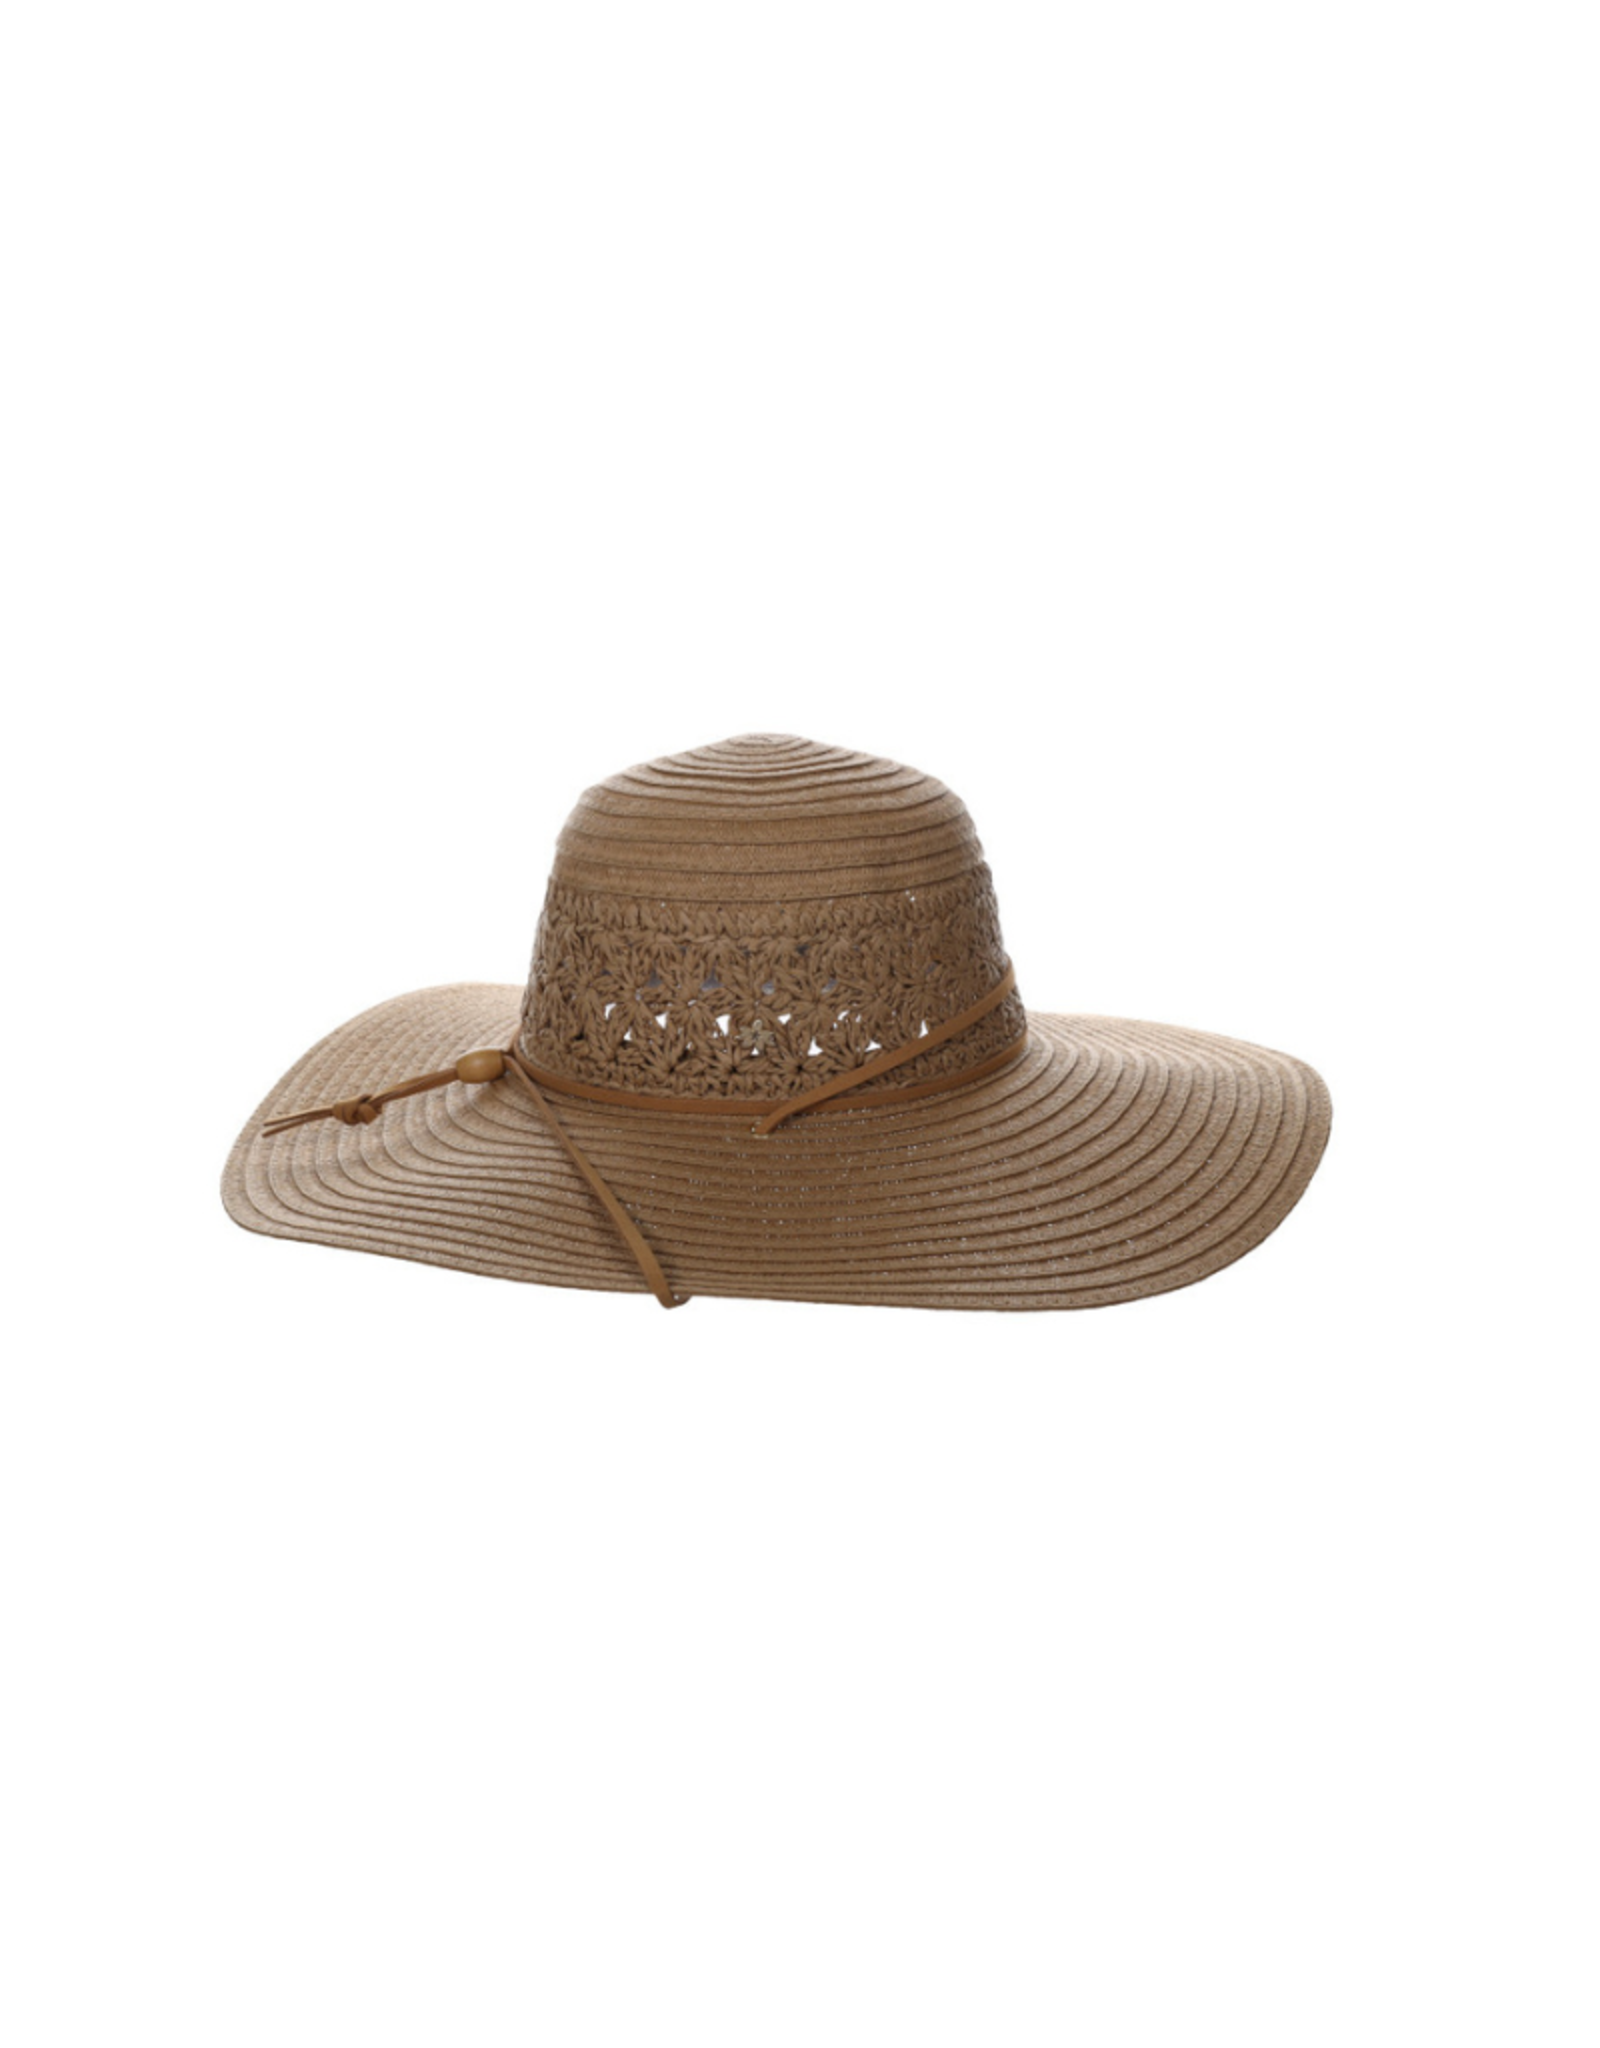 HAT-WIDE BRIM "MARY ABLE"